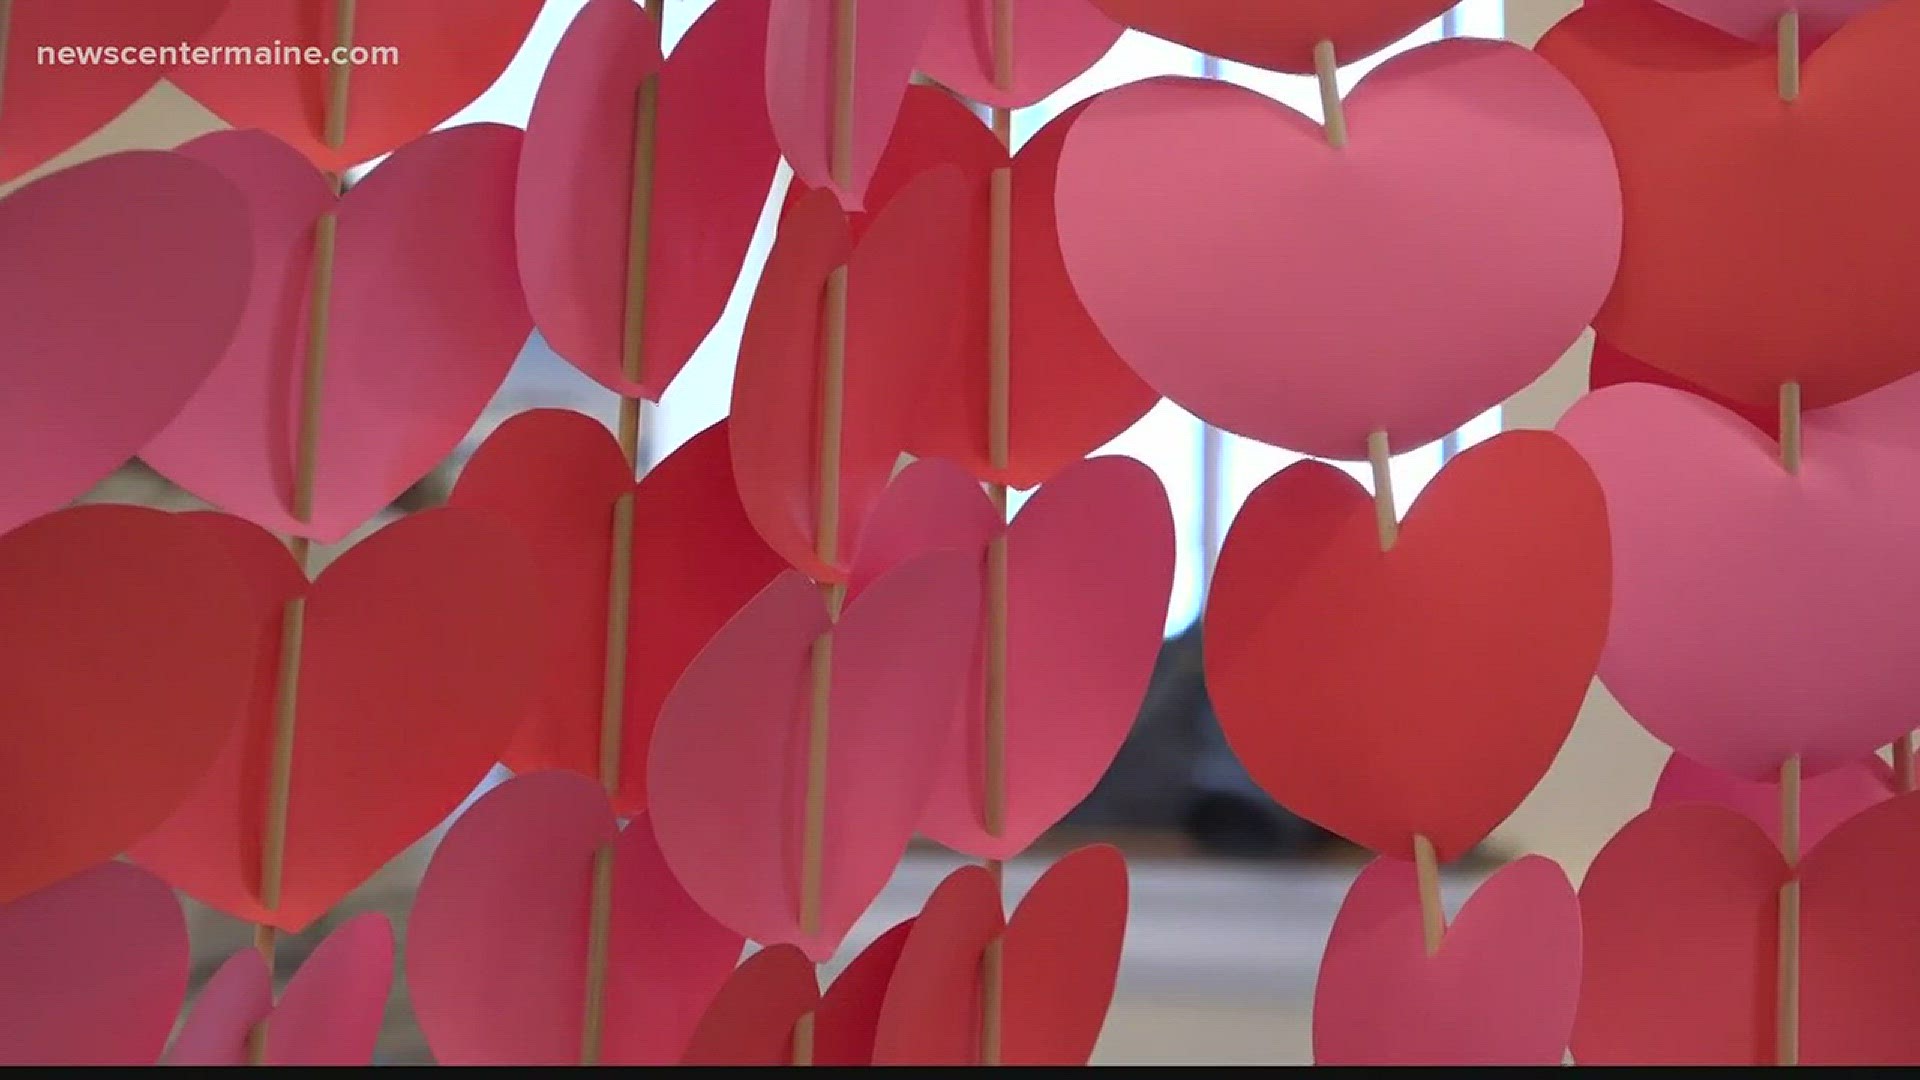 Hundreds of hearts representing foster kids decorate the Maine State House for Valentine's Day